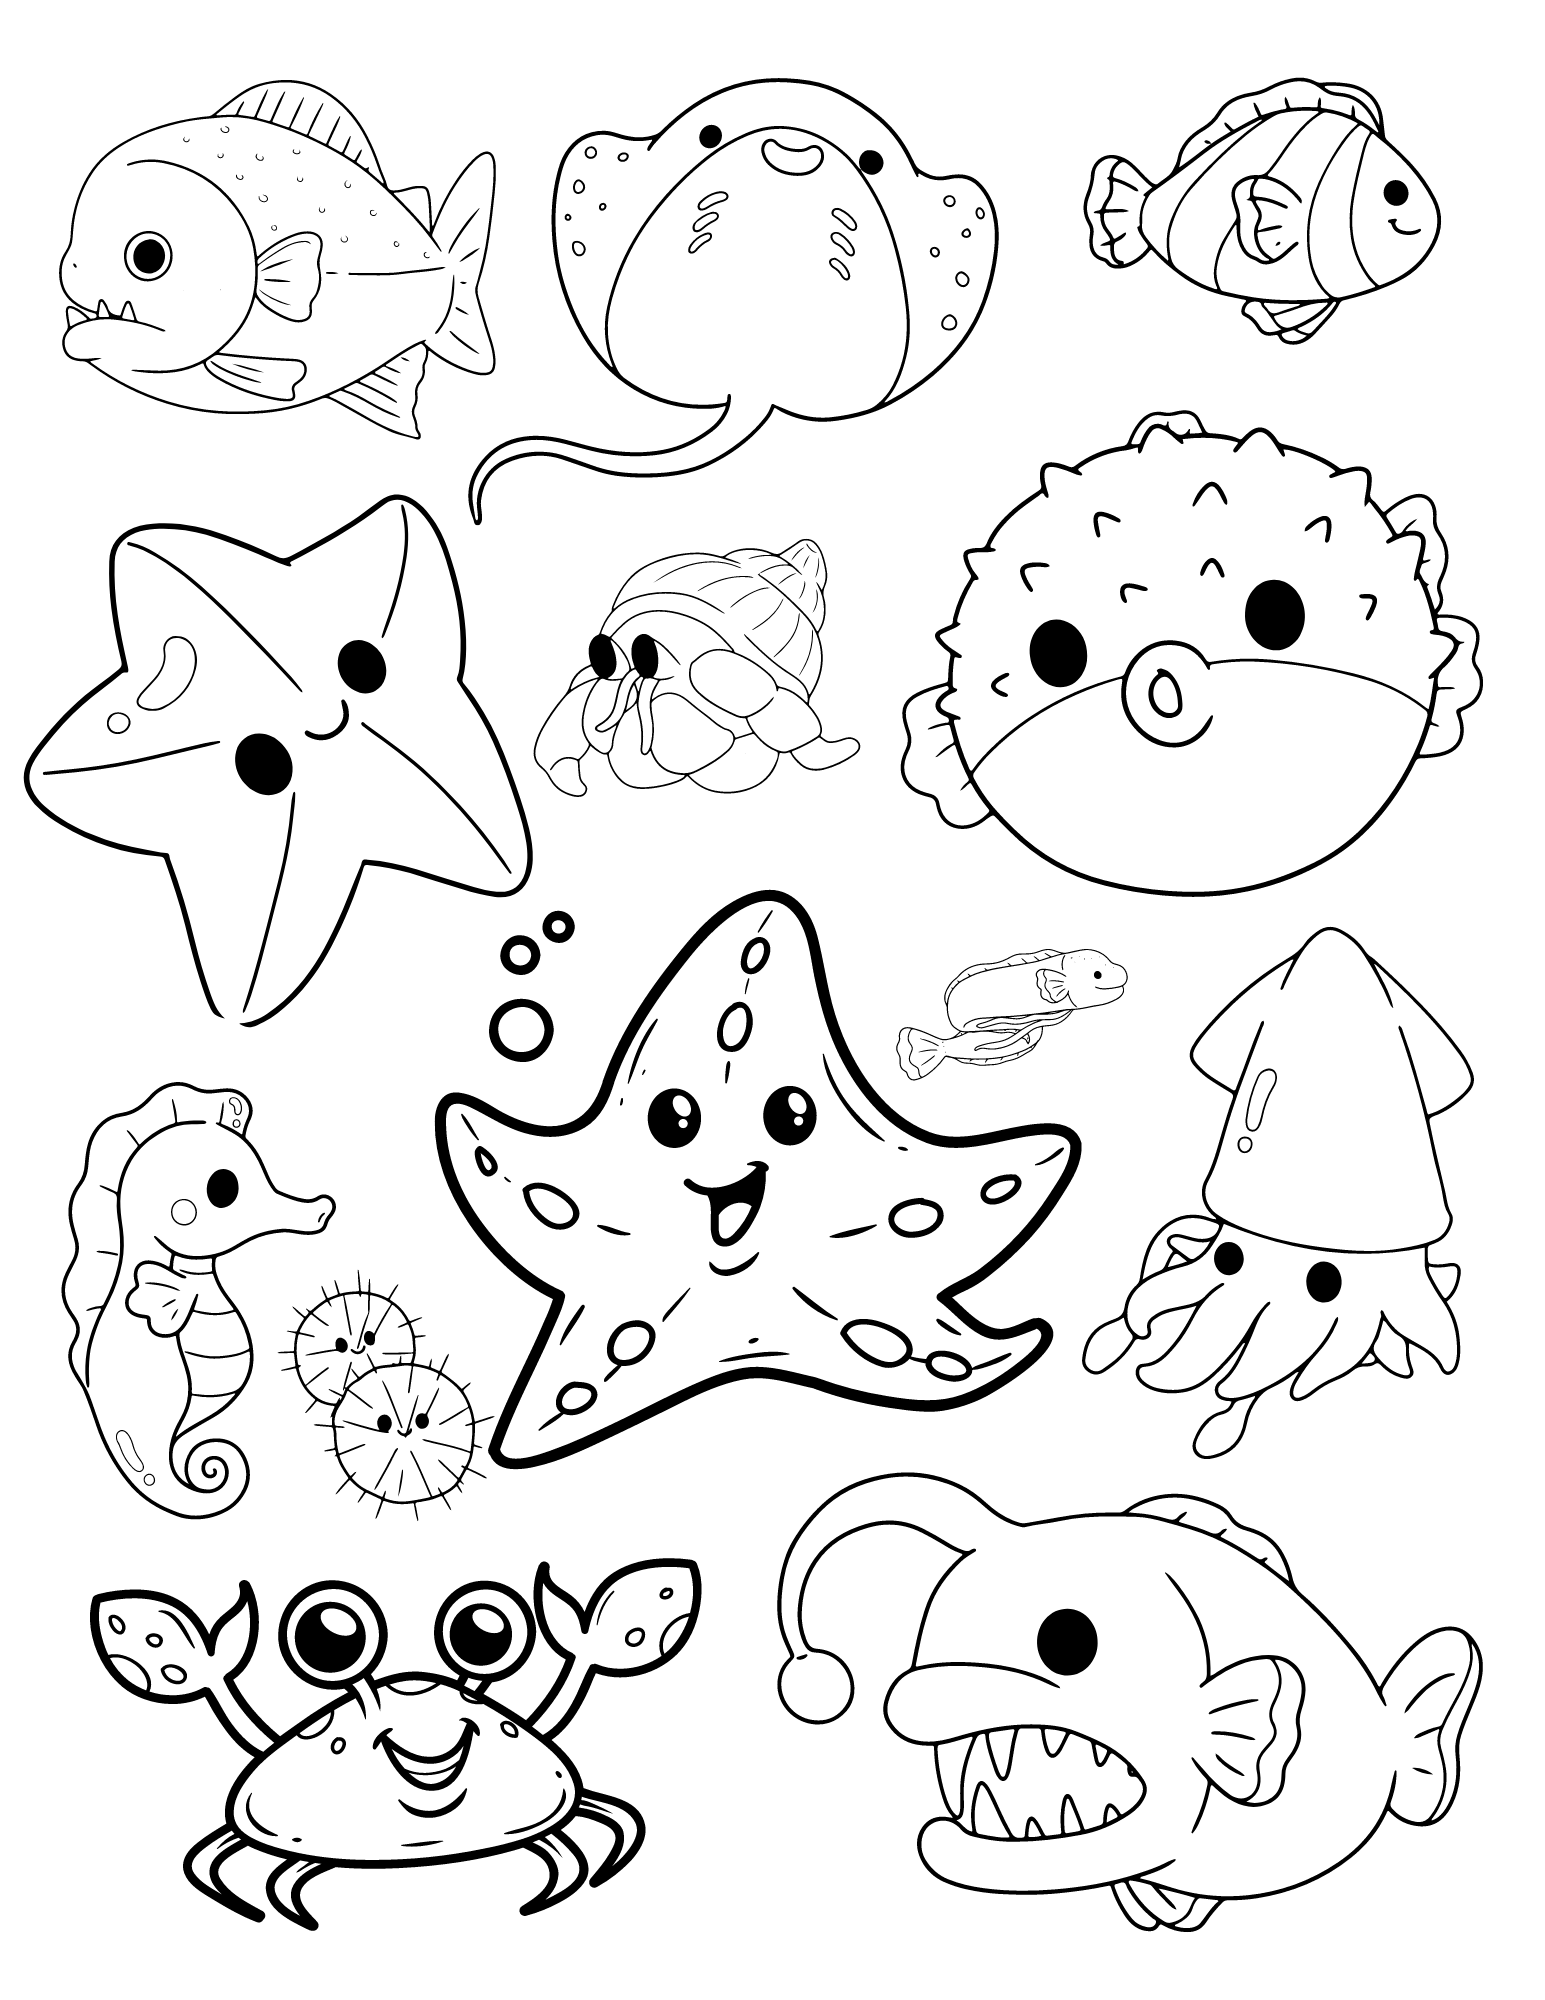 Fabulous fish coloring pages for kids and adults